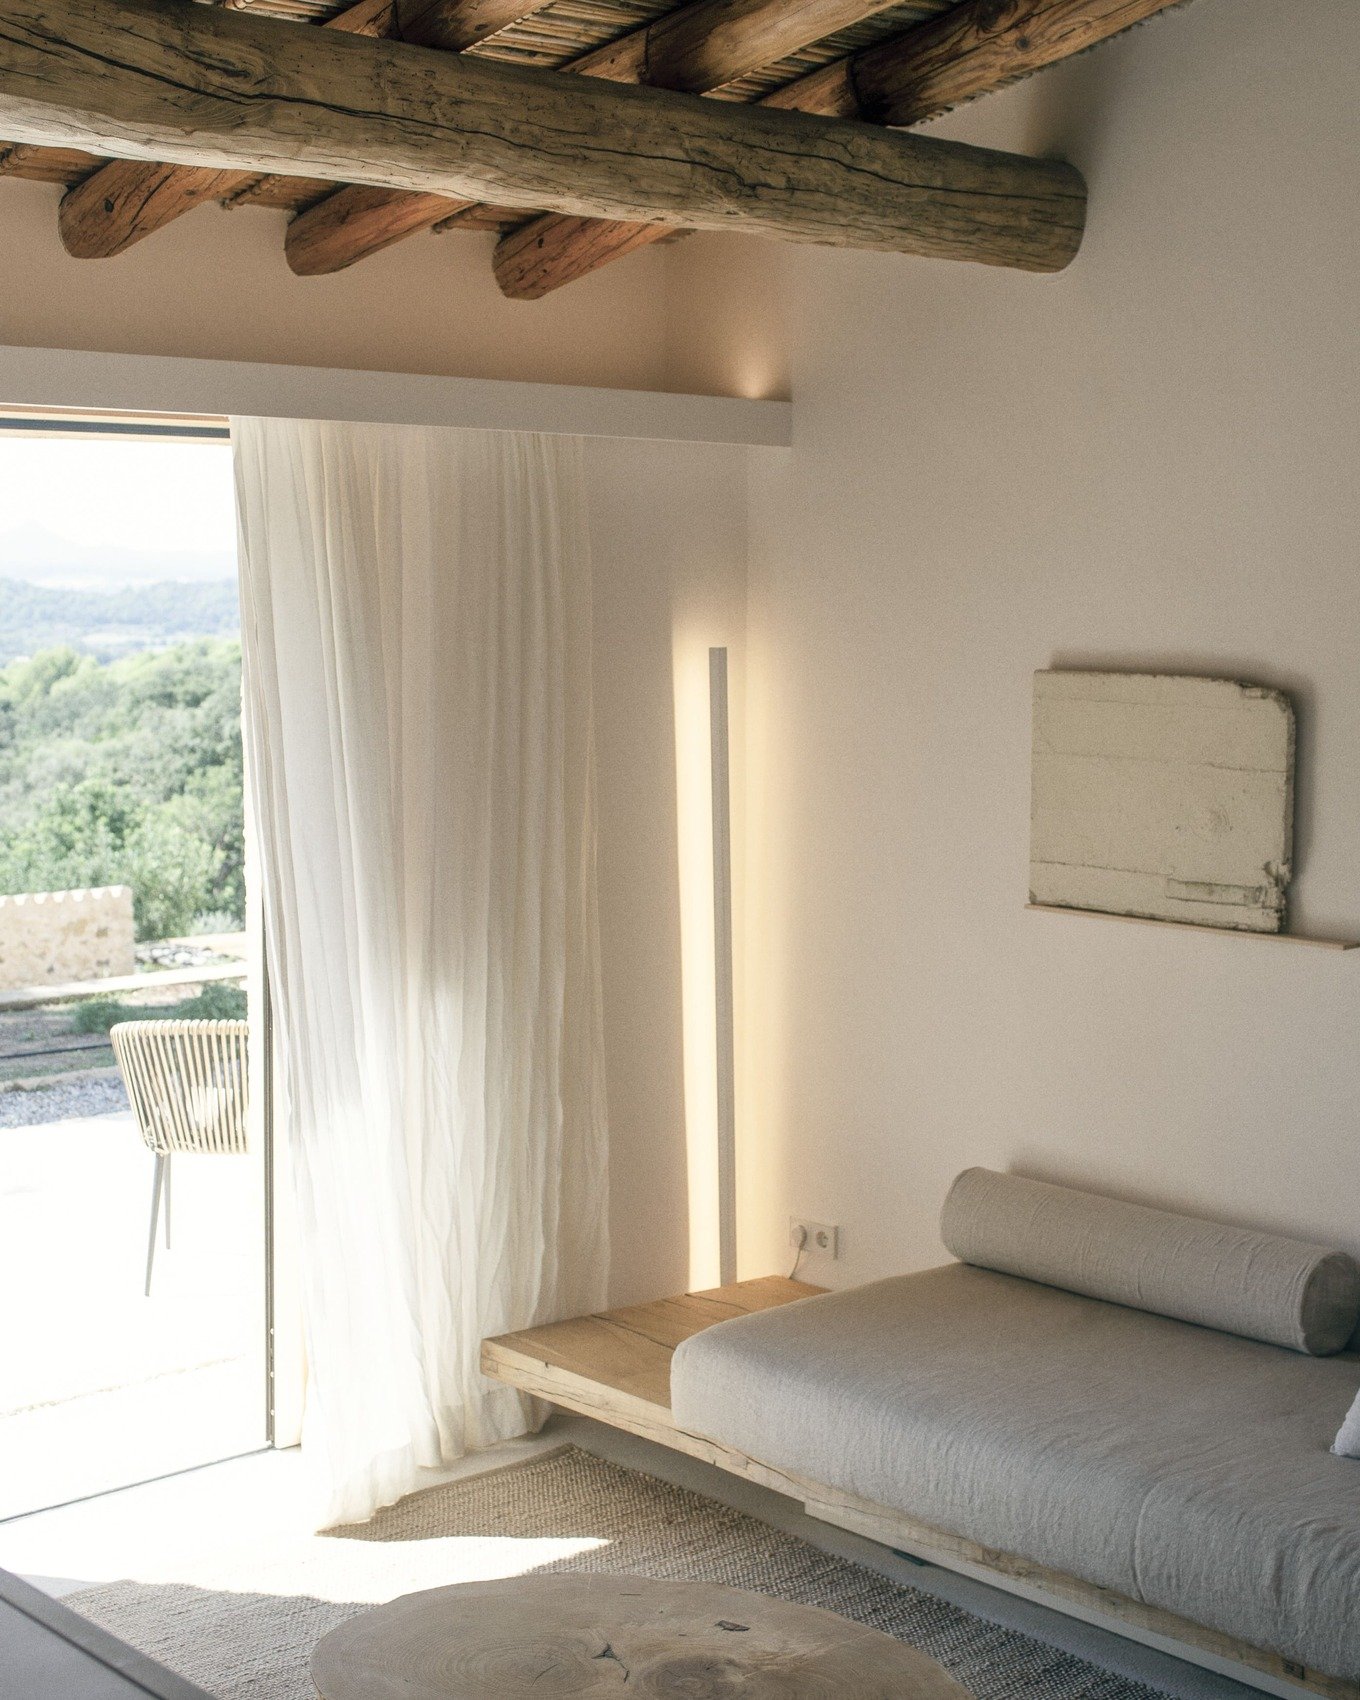 Luxury eco hotel with spa and restaurant 5 stars Mallorca Spain - Es Raco d'Arta - suite room